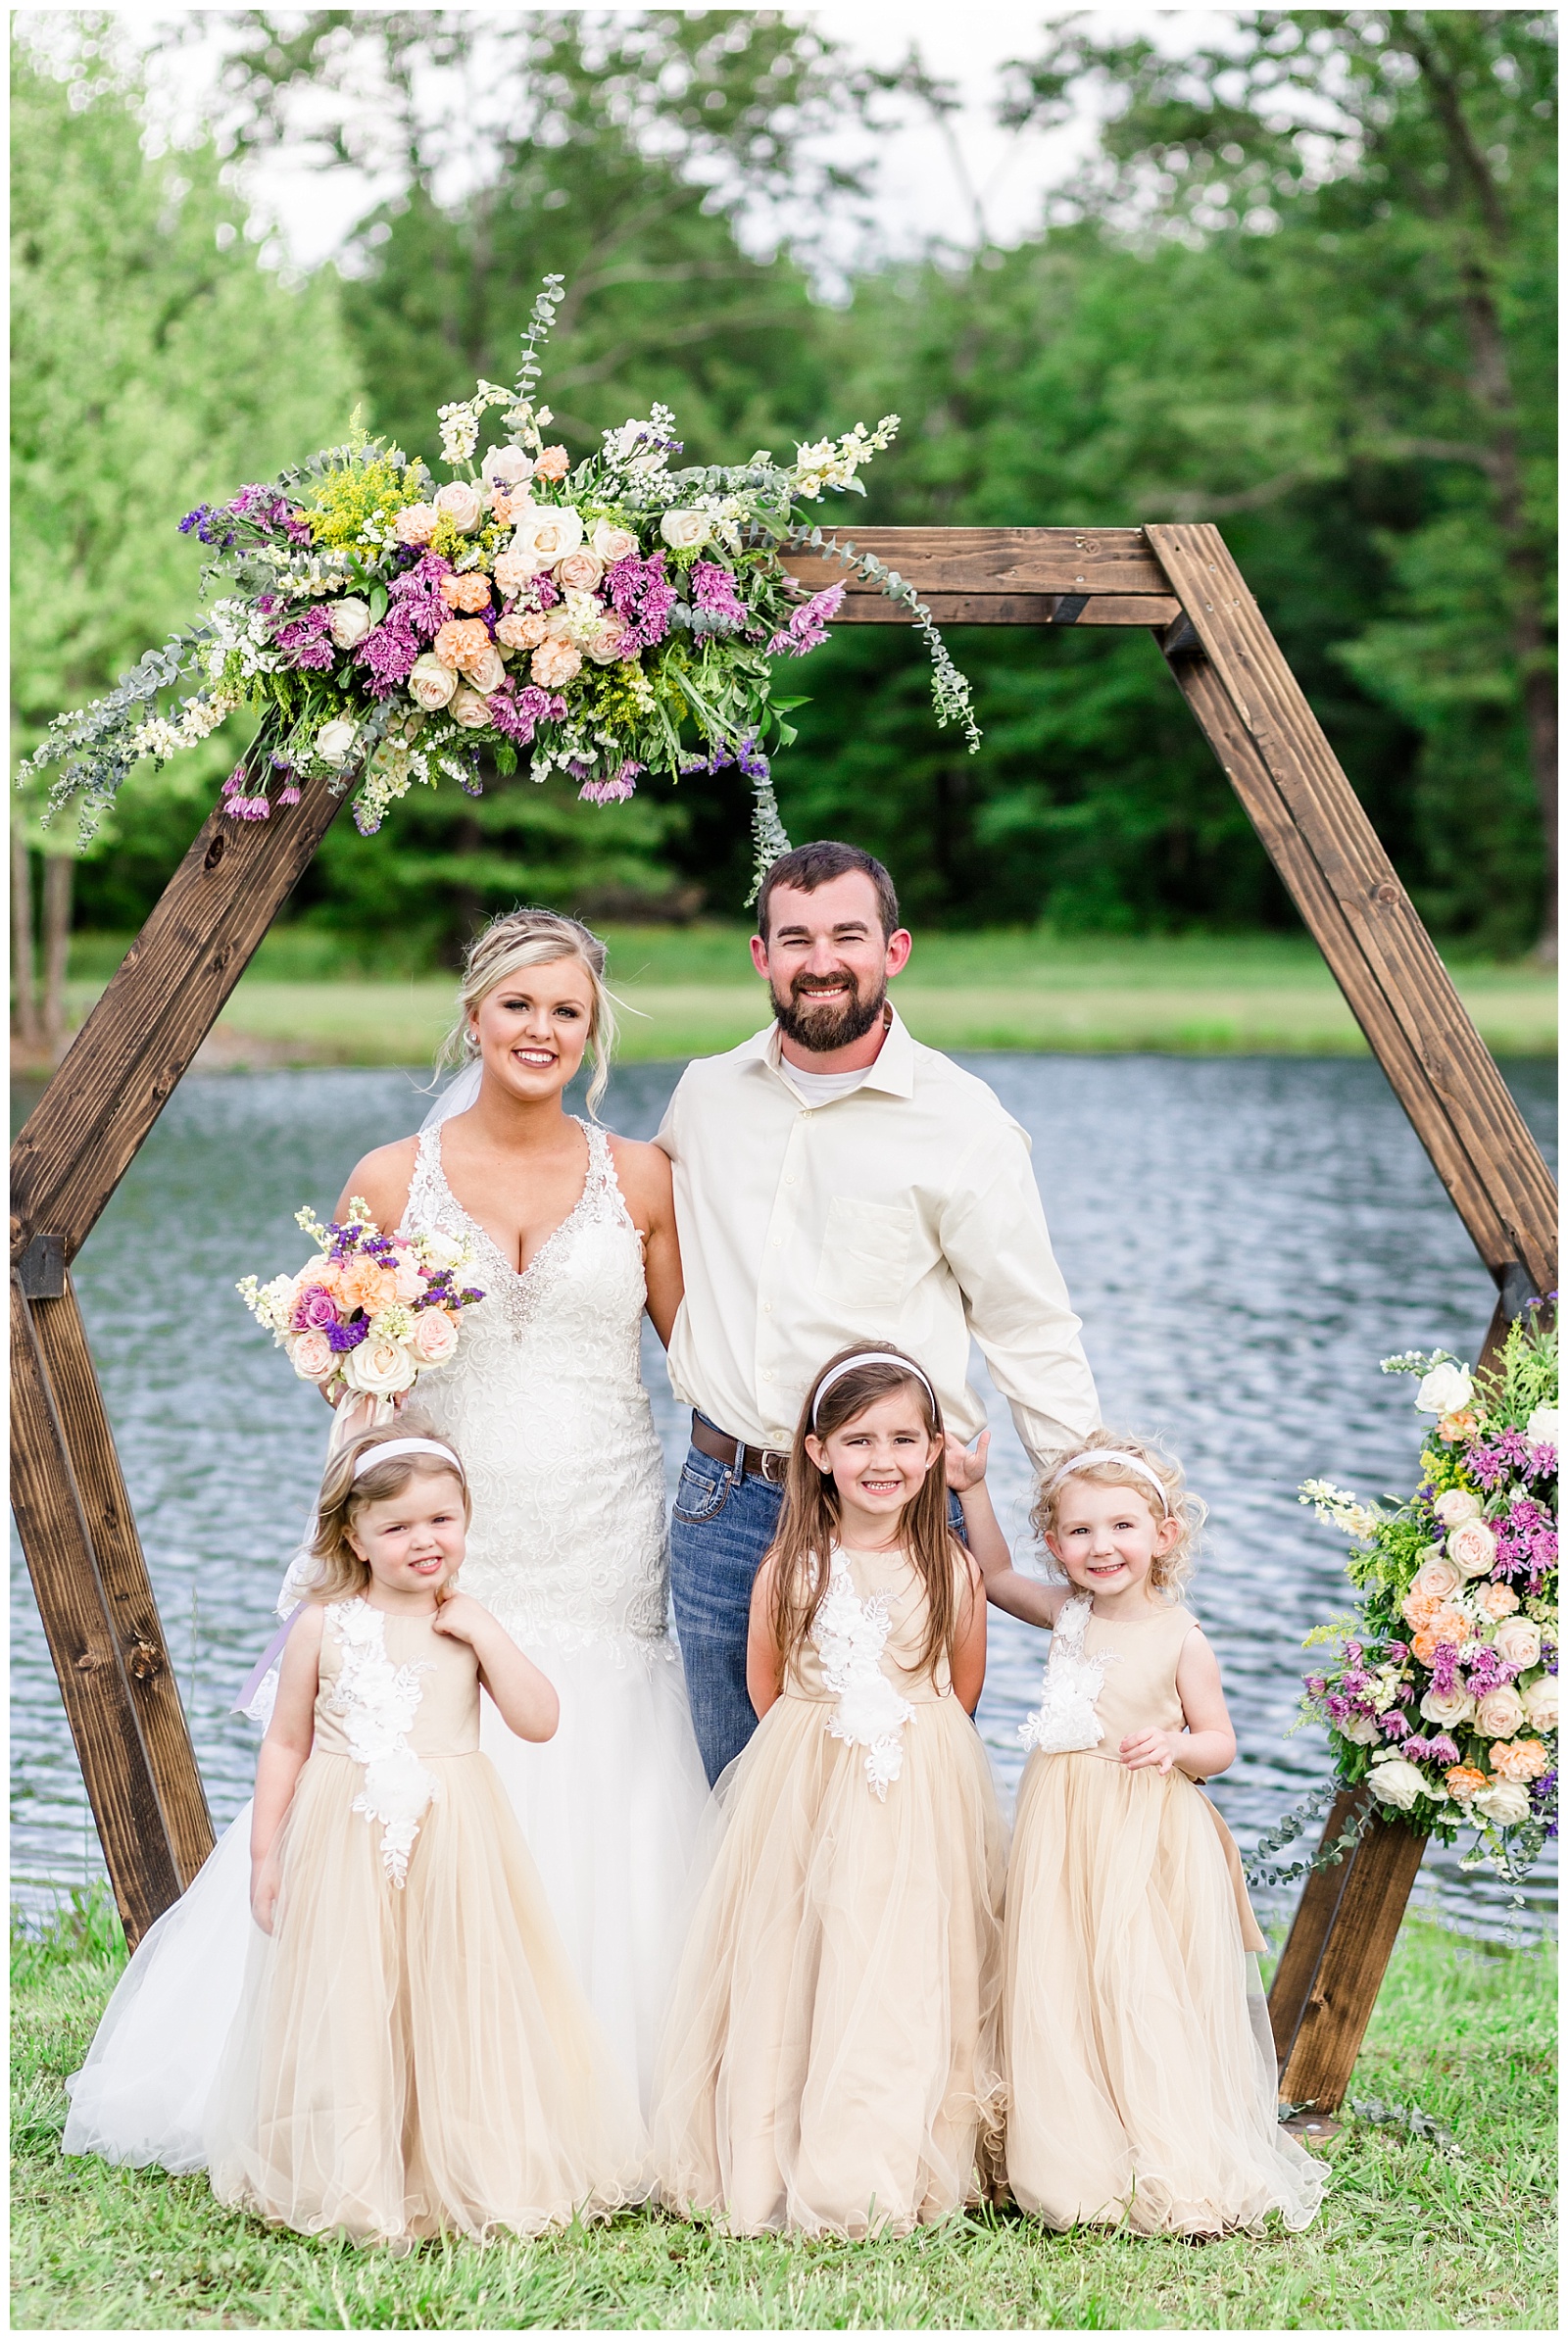 Southern alabama family portrait for country wedding with purple and gold details and mermaid wedding dress with bride and groom and their children